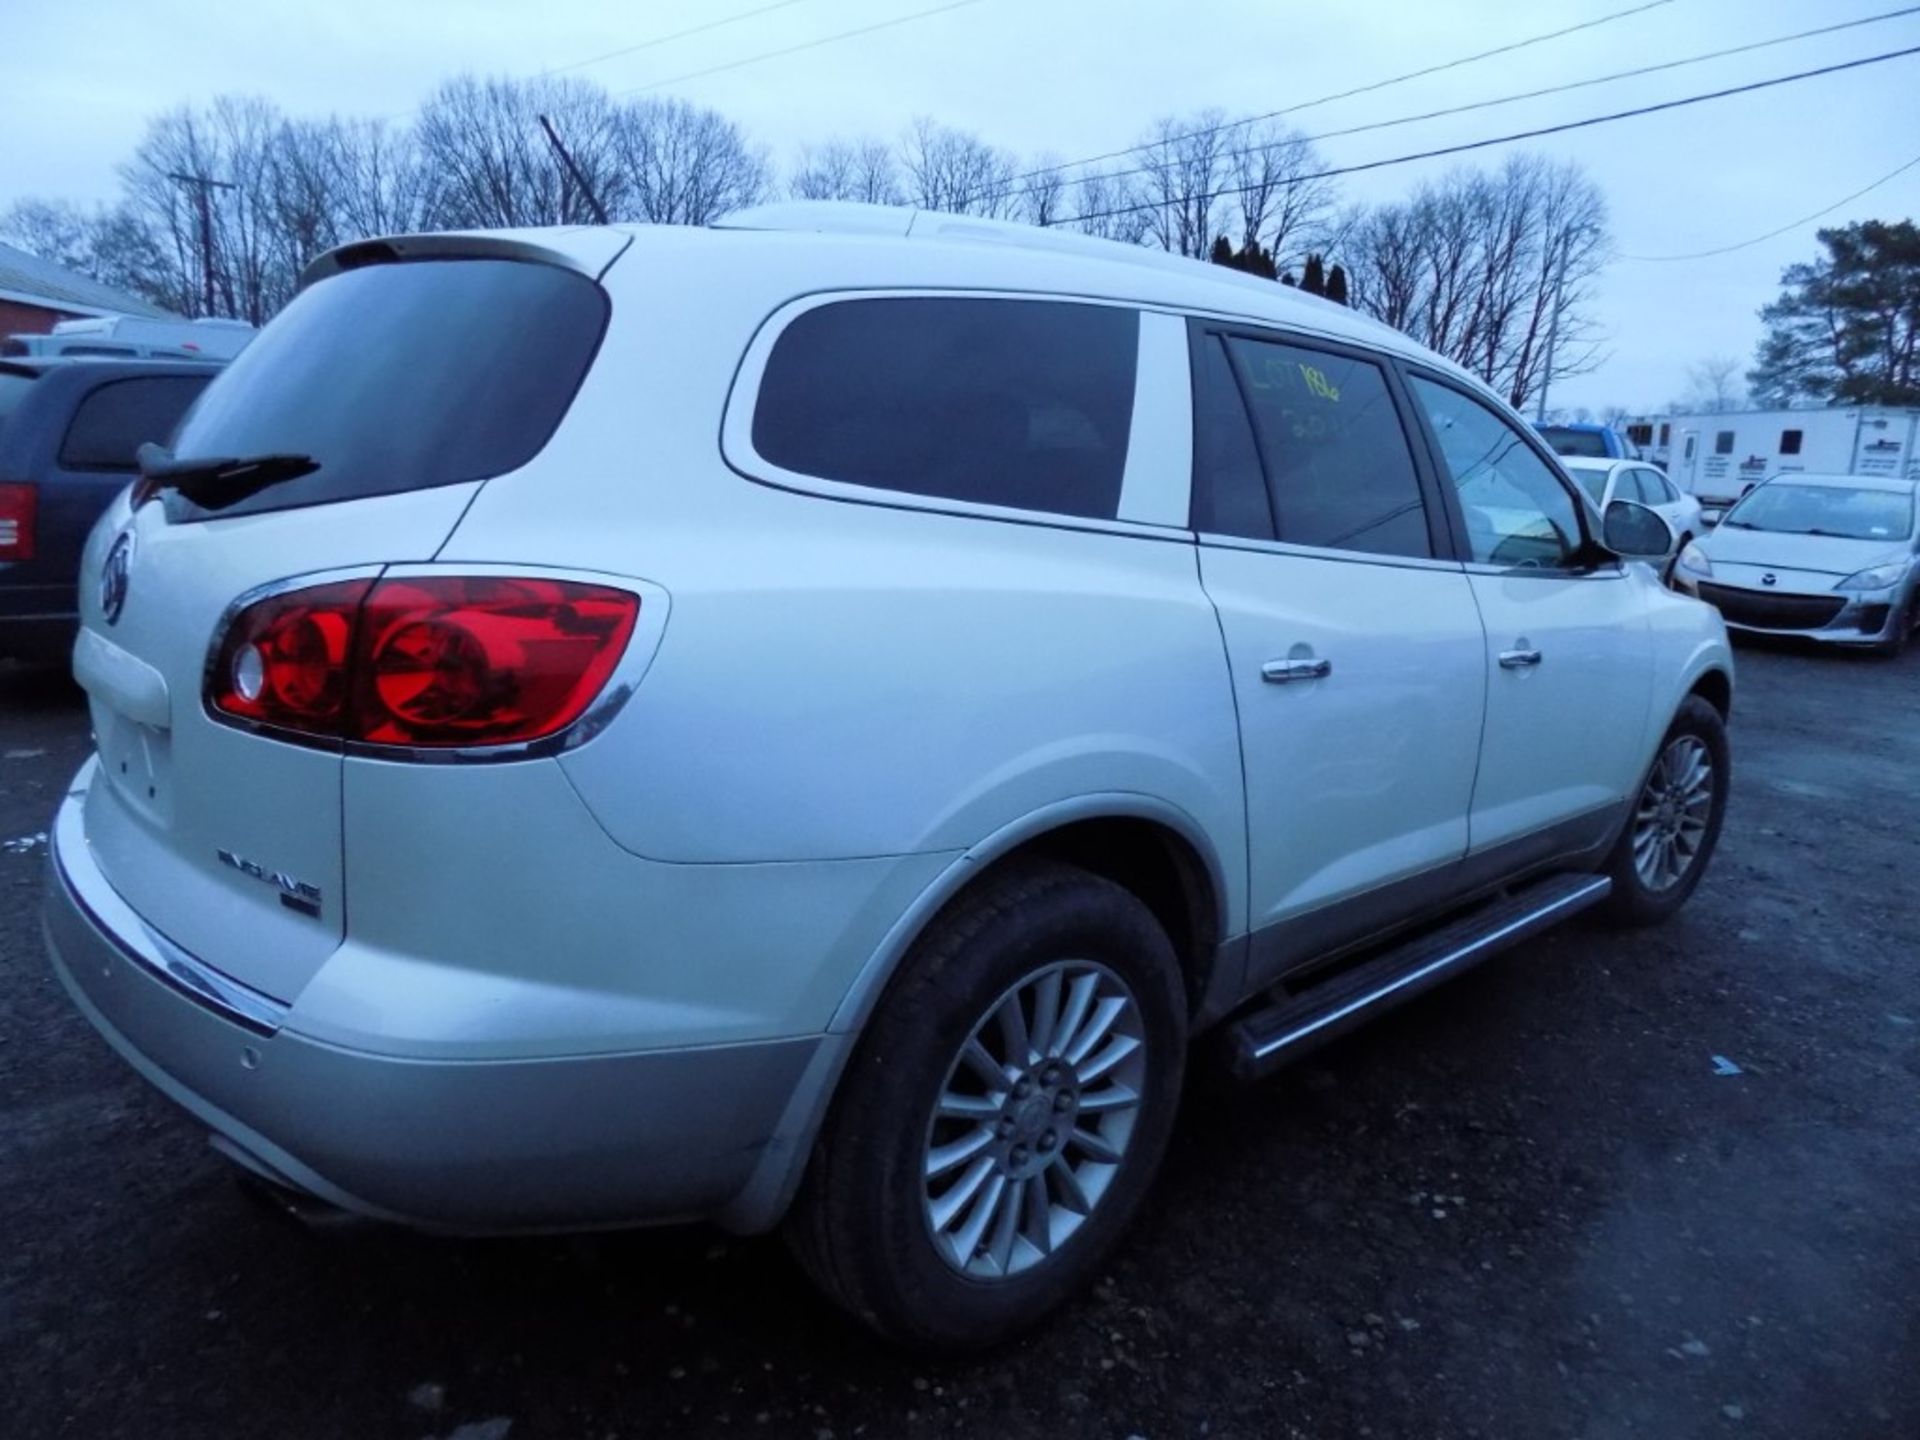 2011 Buick Enclave CXL-1, Leather, Sunroof, Front Wheel Drive, White, 160,845 Mi, PASSENGER FRONT - Image 5 of 13